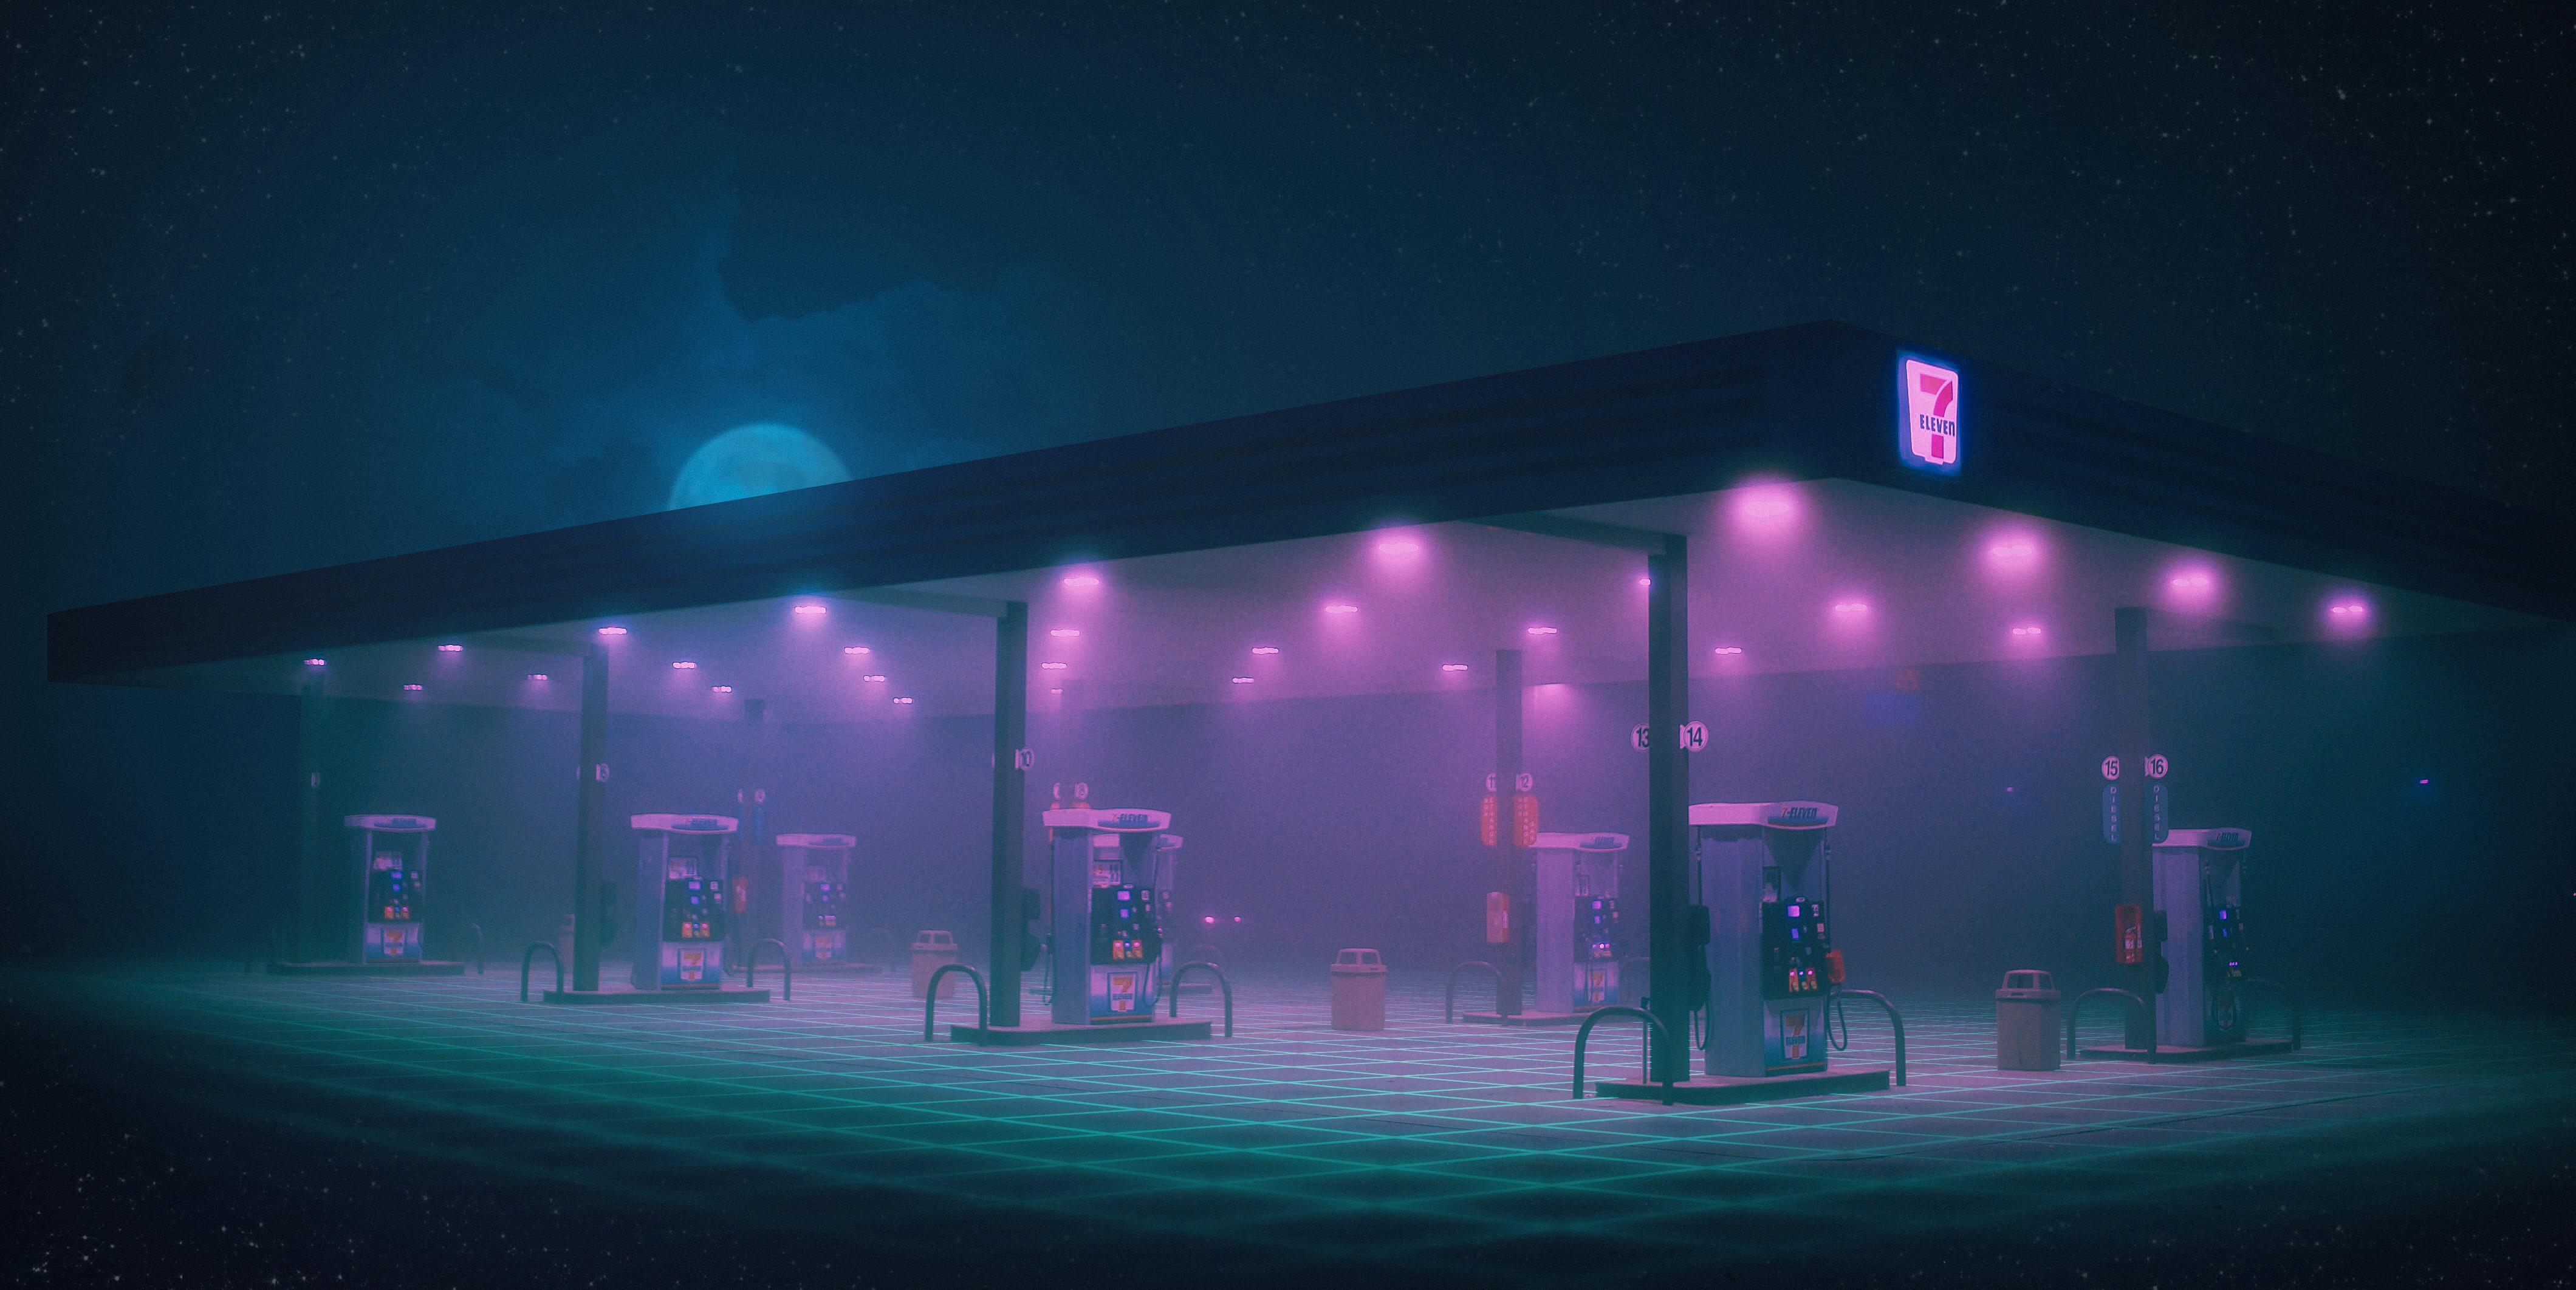 Basketball Aesthetic cool gas station led music nice vapourwave HD  phone wallpaper  Peakpx